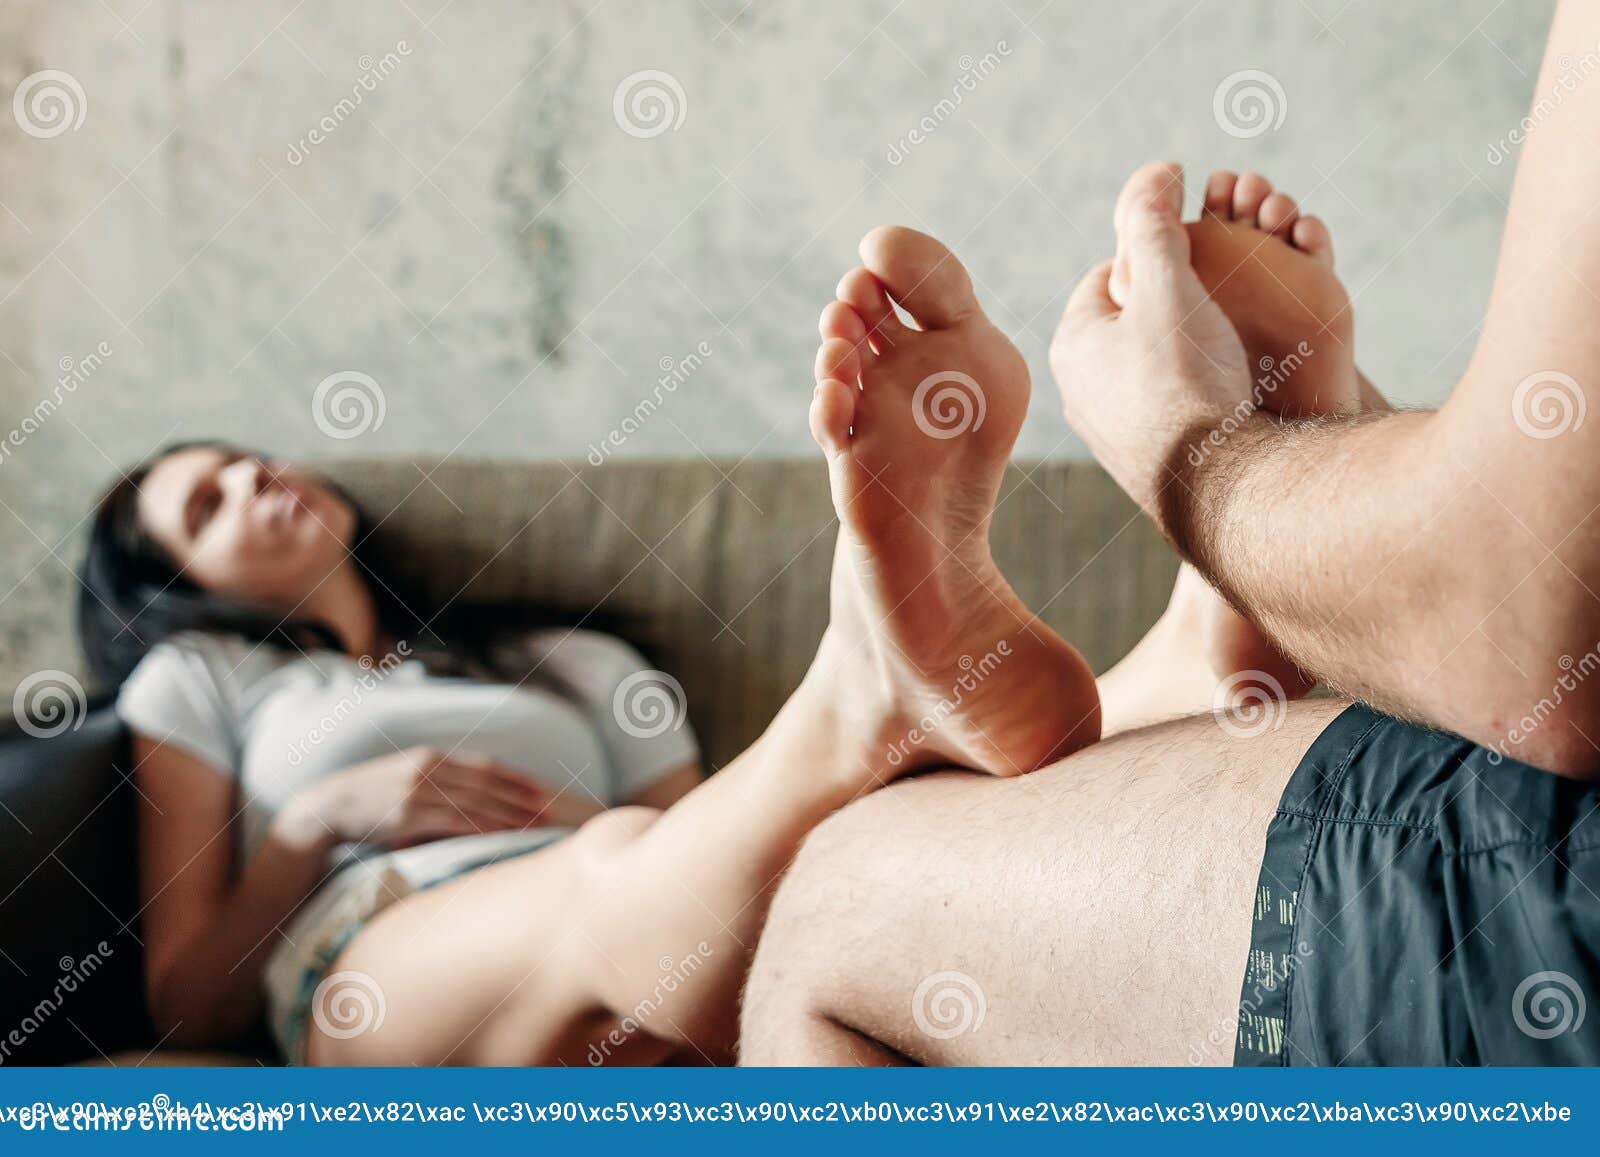 Close-up of Female Legs Receiving a Foot Massage from Her Husband photo